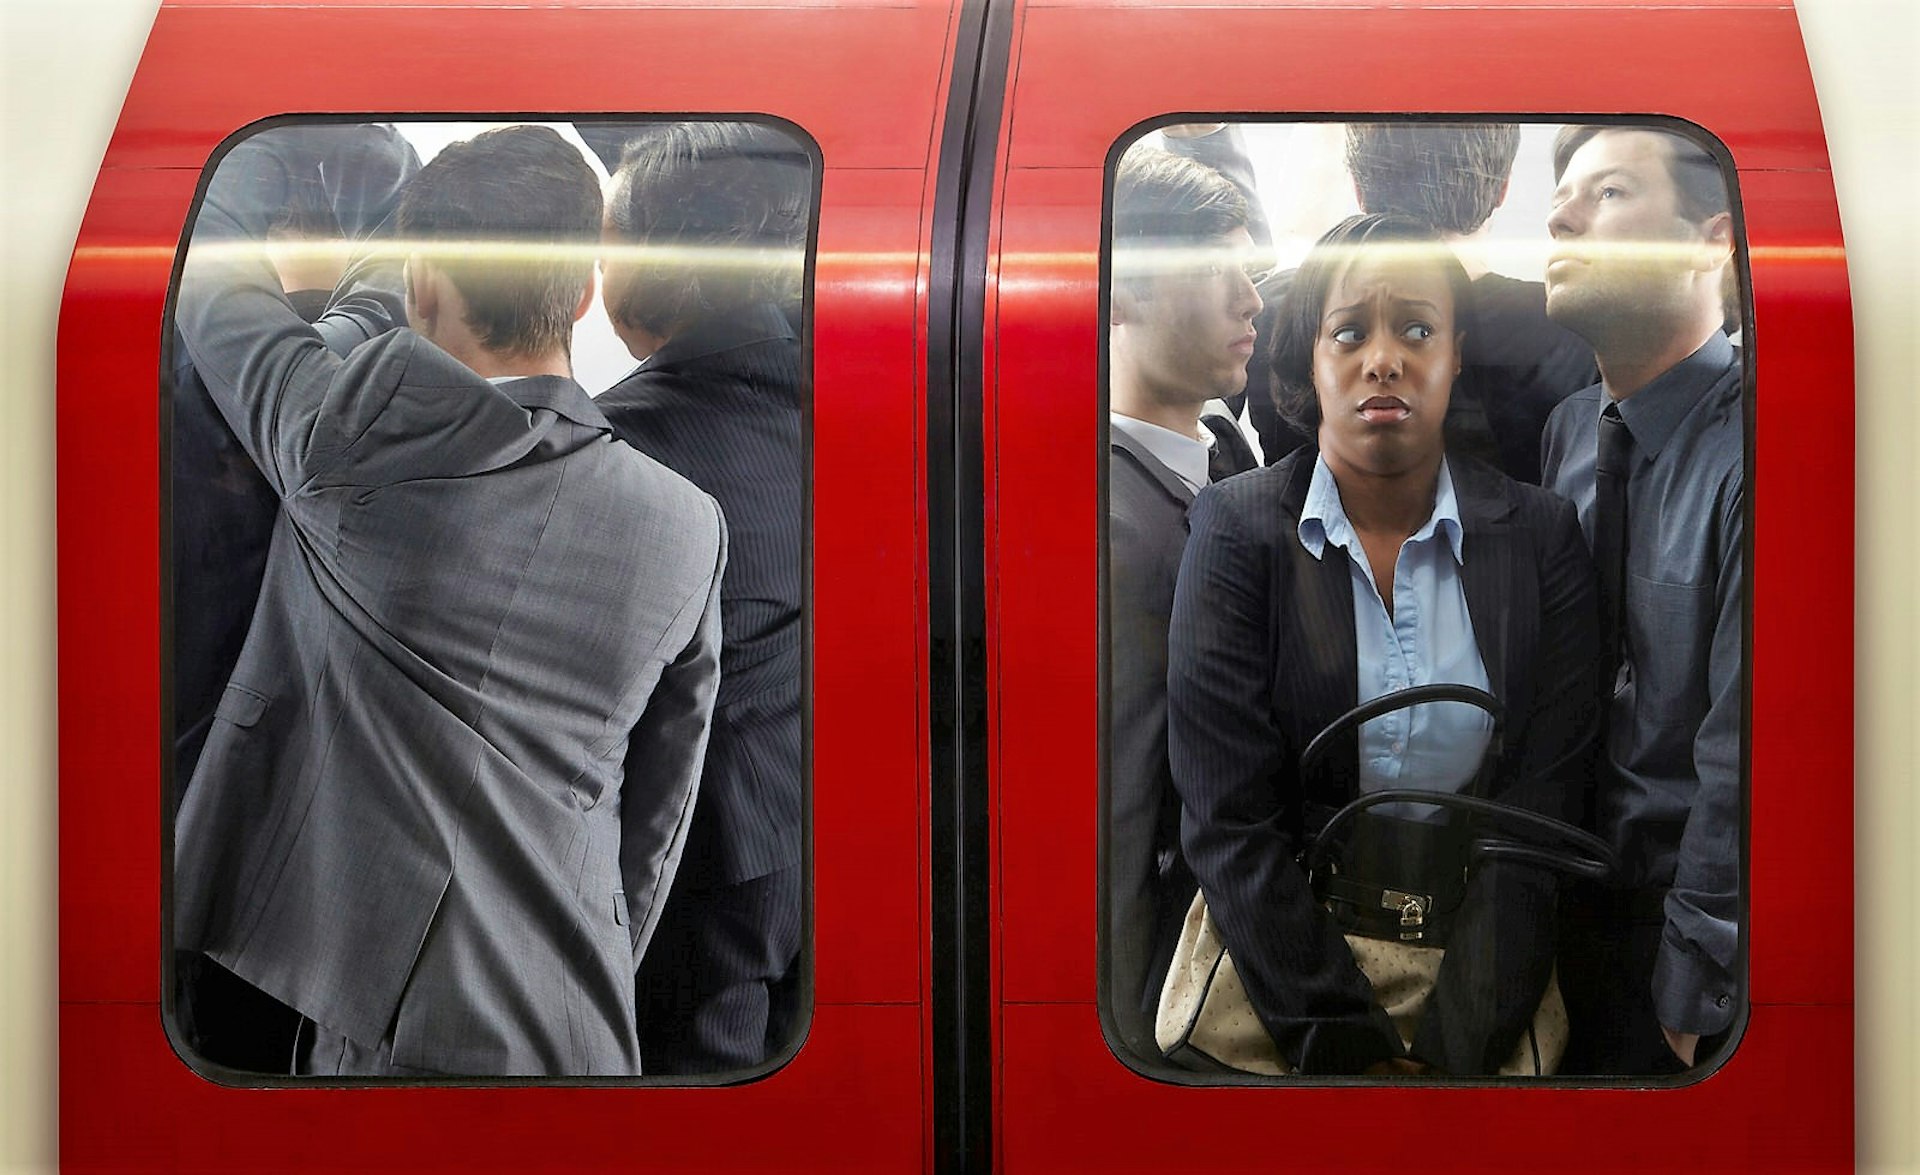 Rush hours can get very busy on the tube